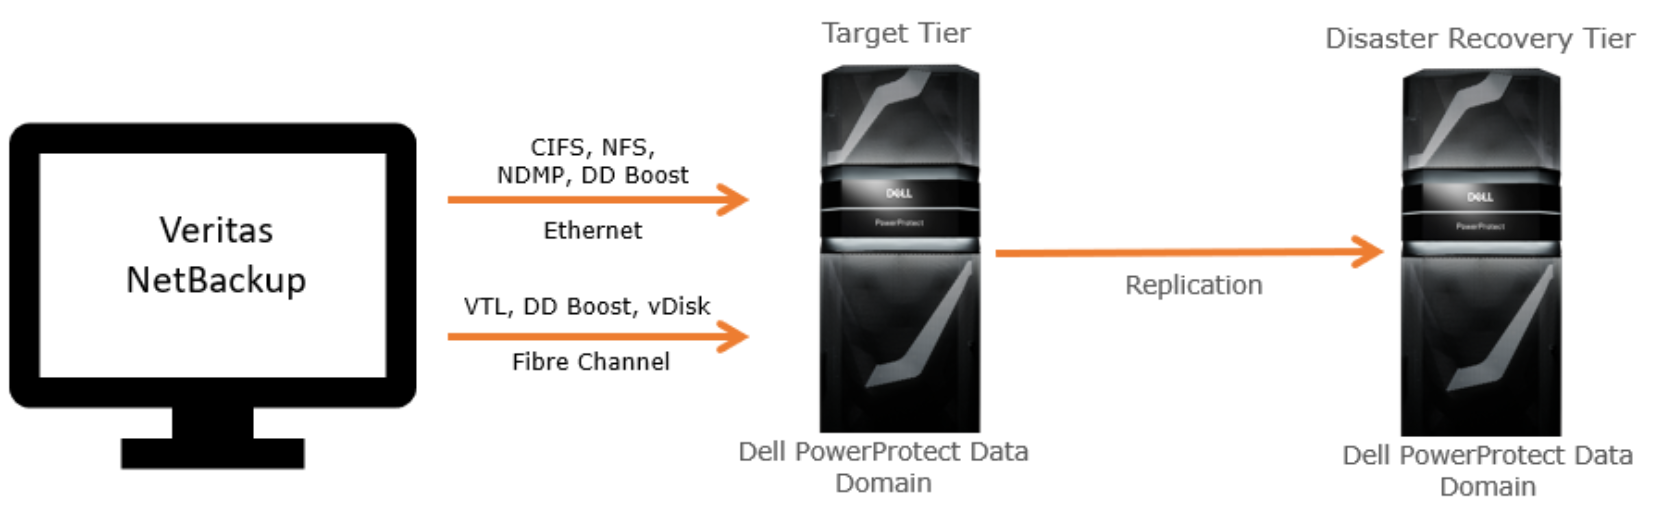 This image shows the NetBackup integration with PowerProtect DD